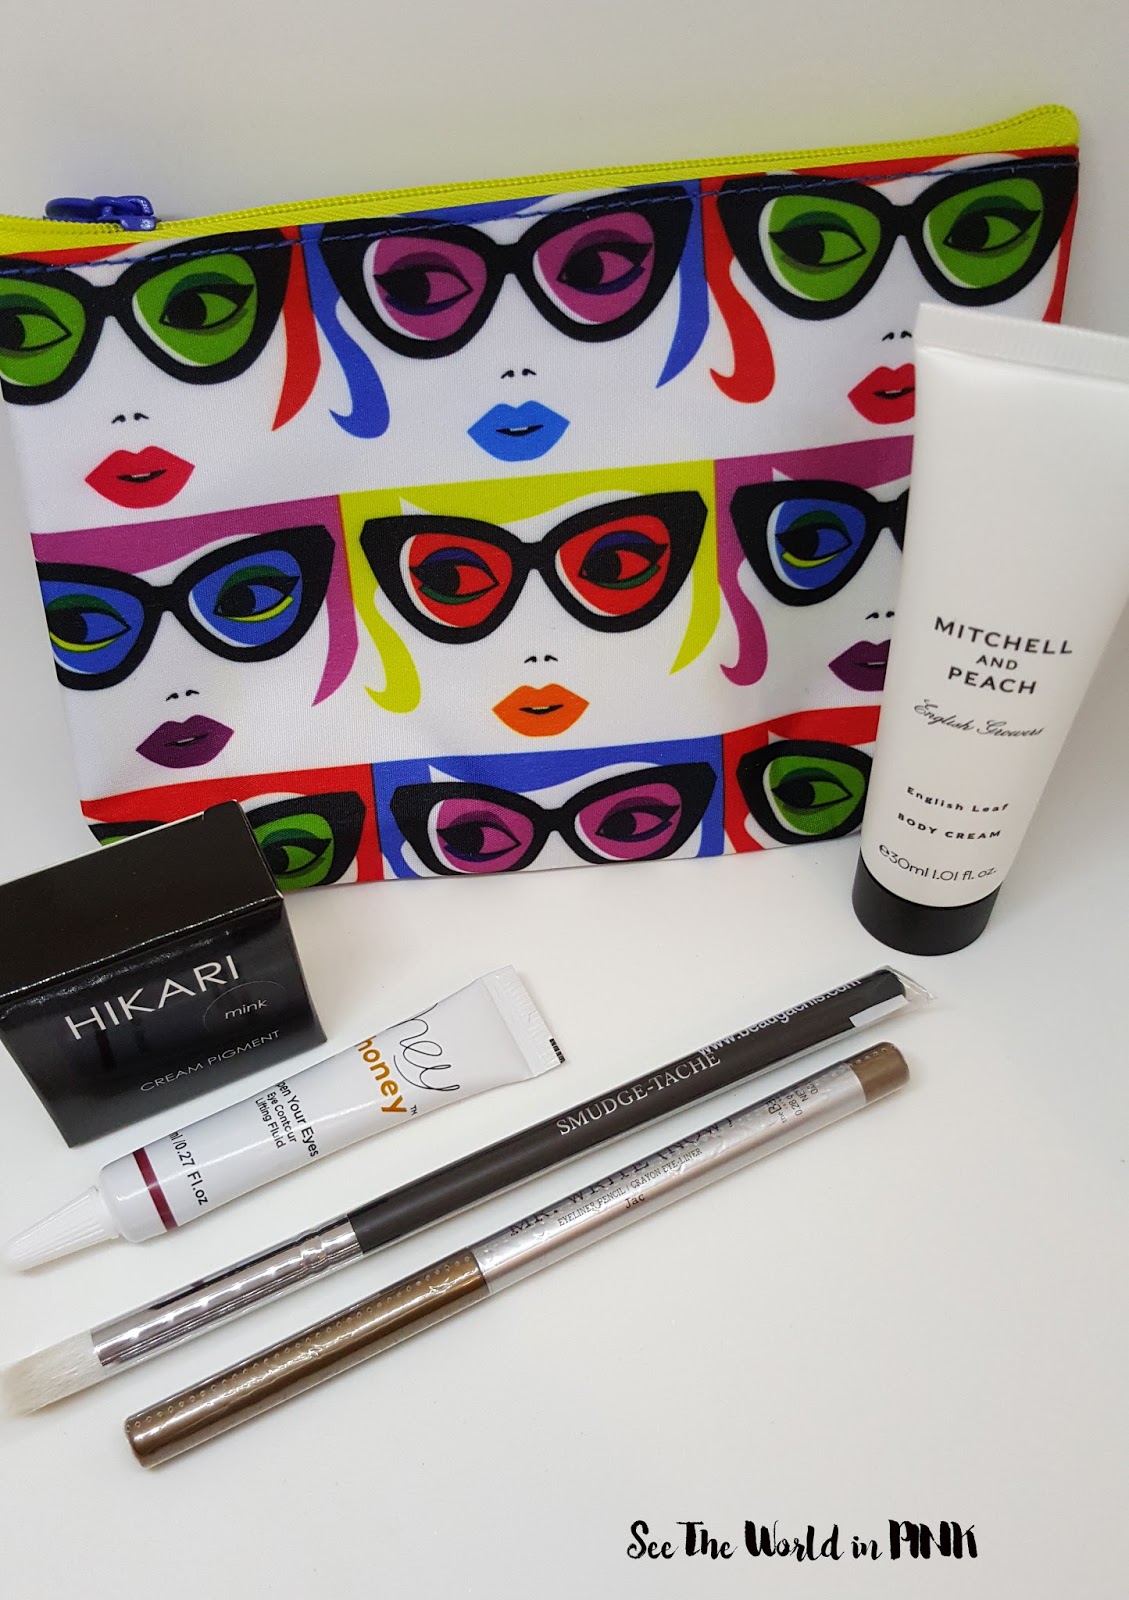 January Ipsy Glambag - Review and Unboxing